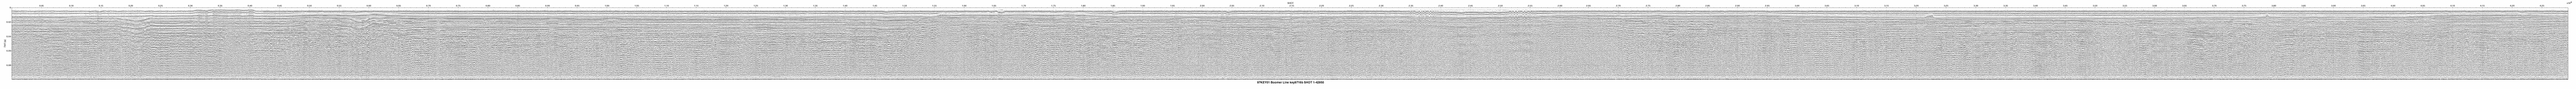 Thumbnail GIF image of the seismic trackline key9716b, with a hotlink to the more detailed, larger JPG image.